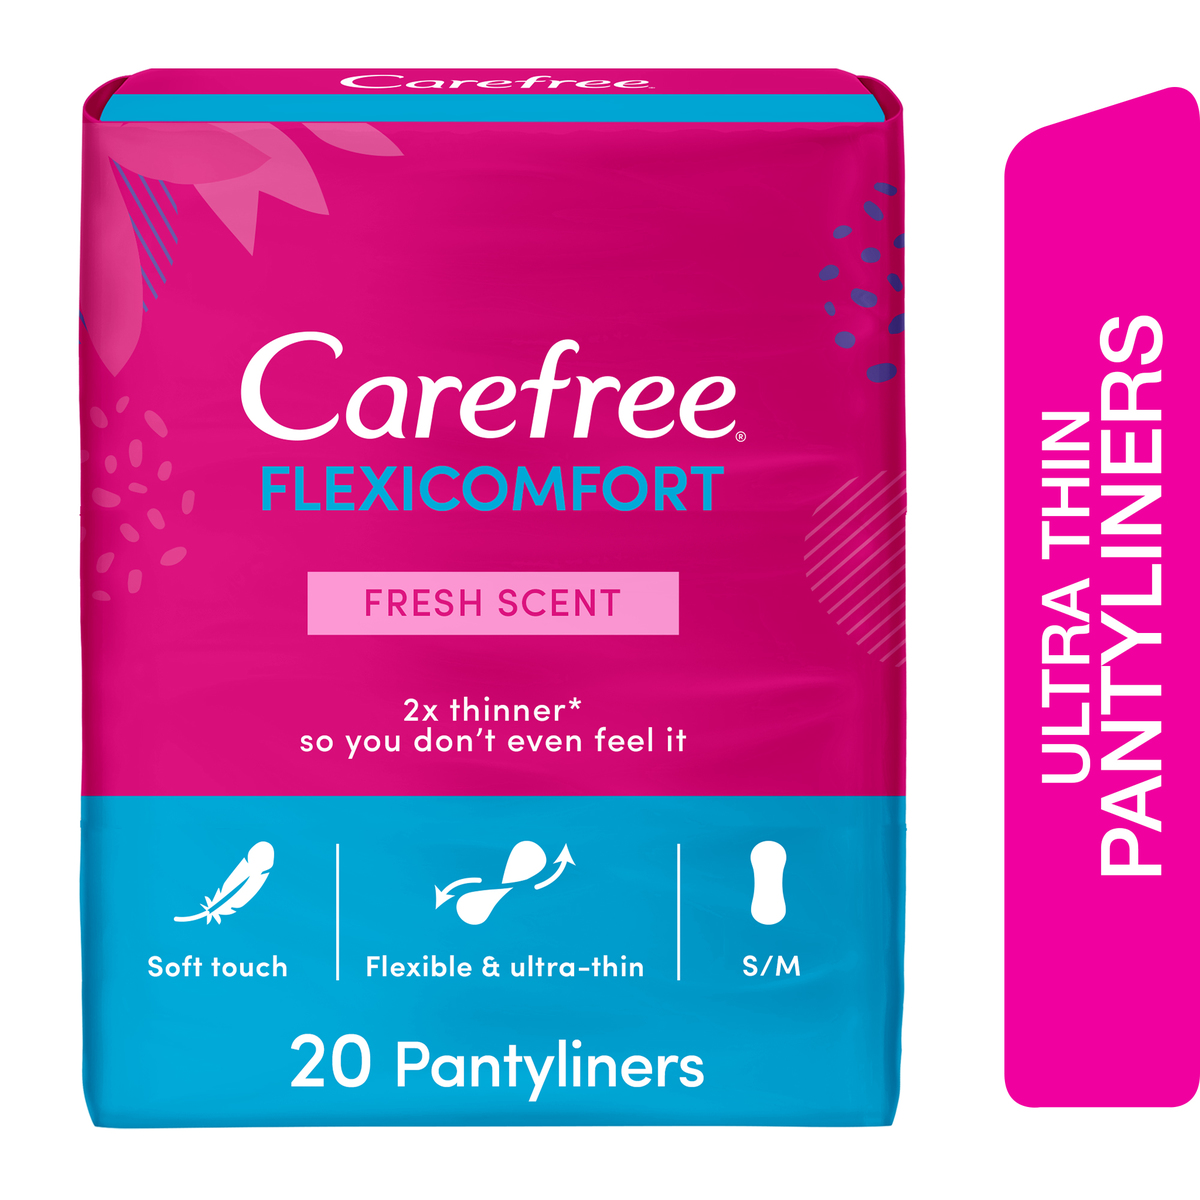 Carefree Panty Liners FlexiComfort Fresh Scent 20pcs